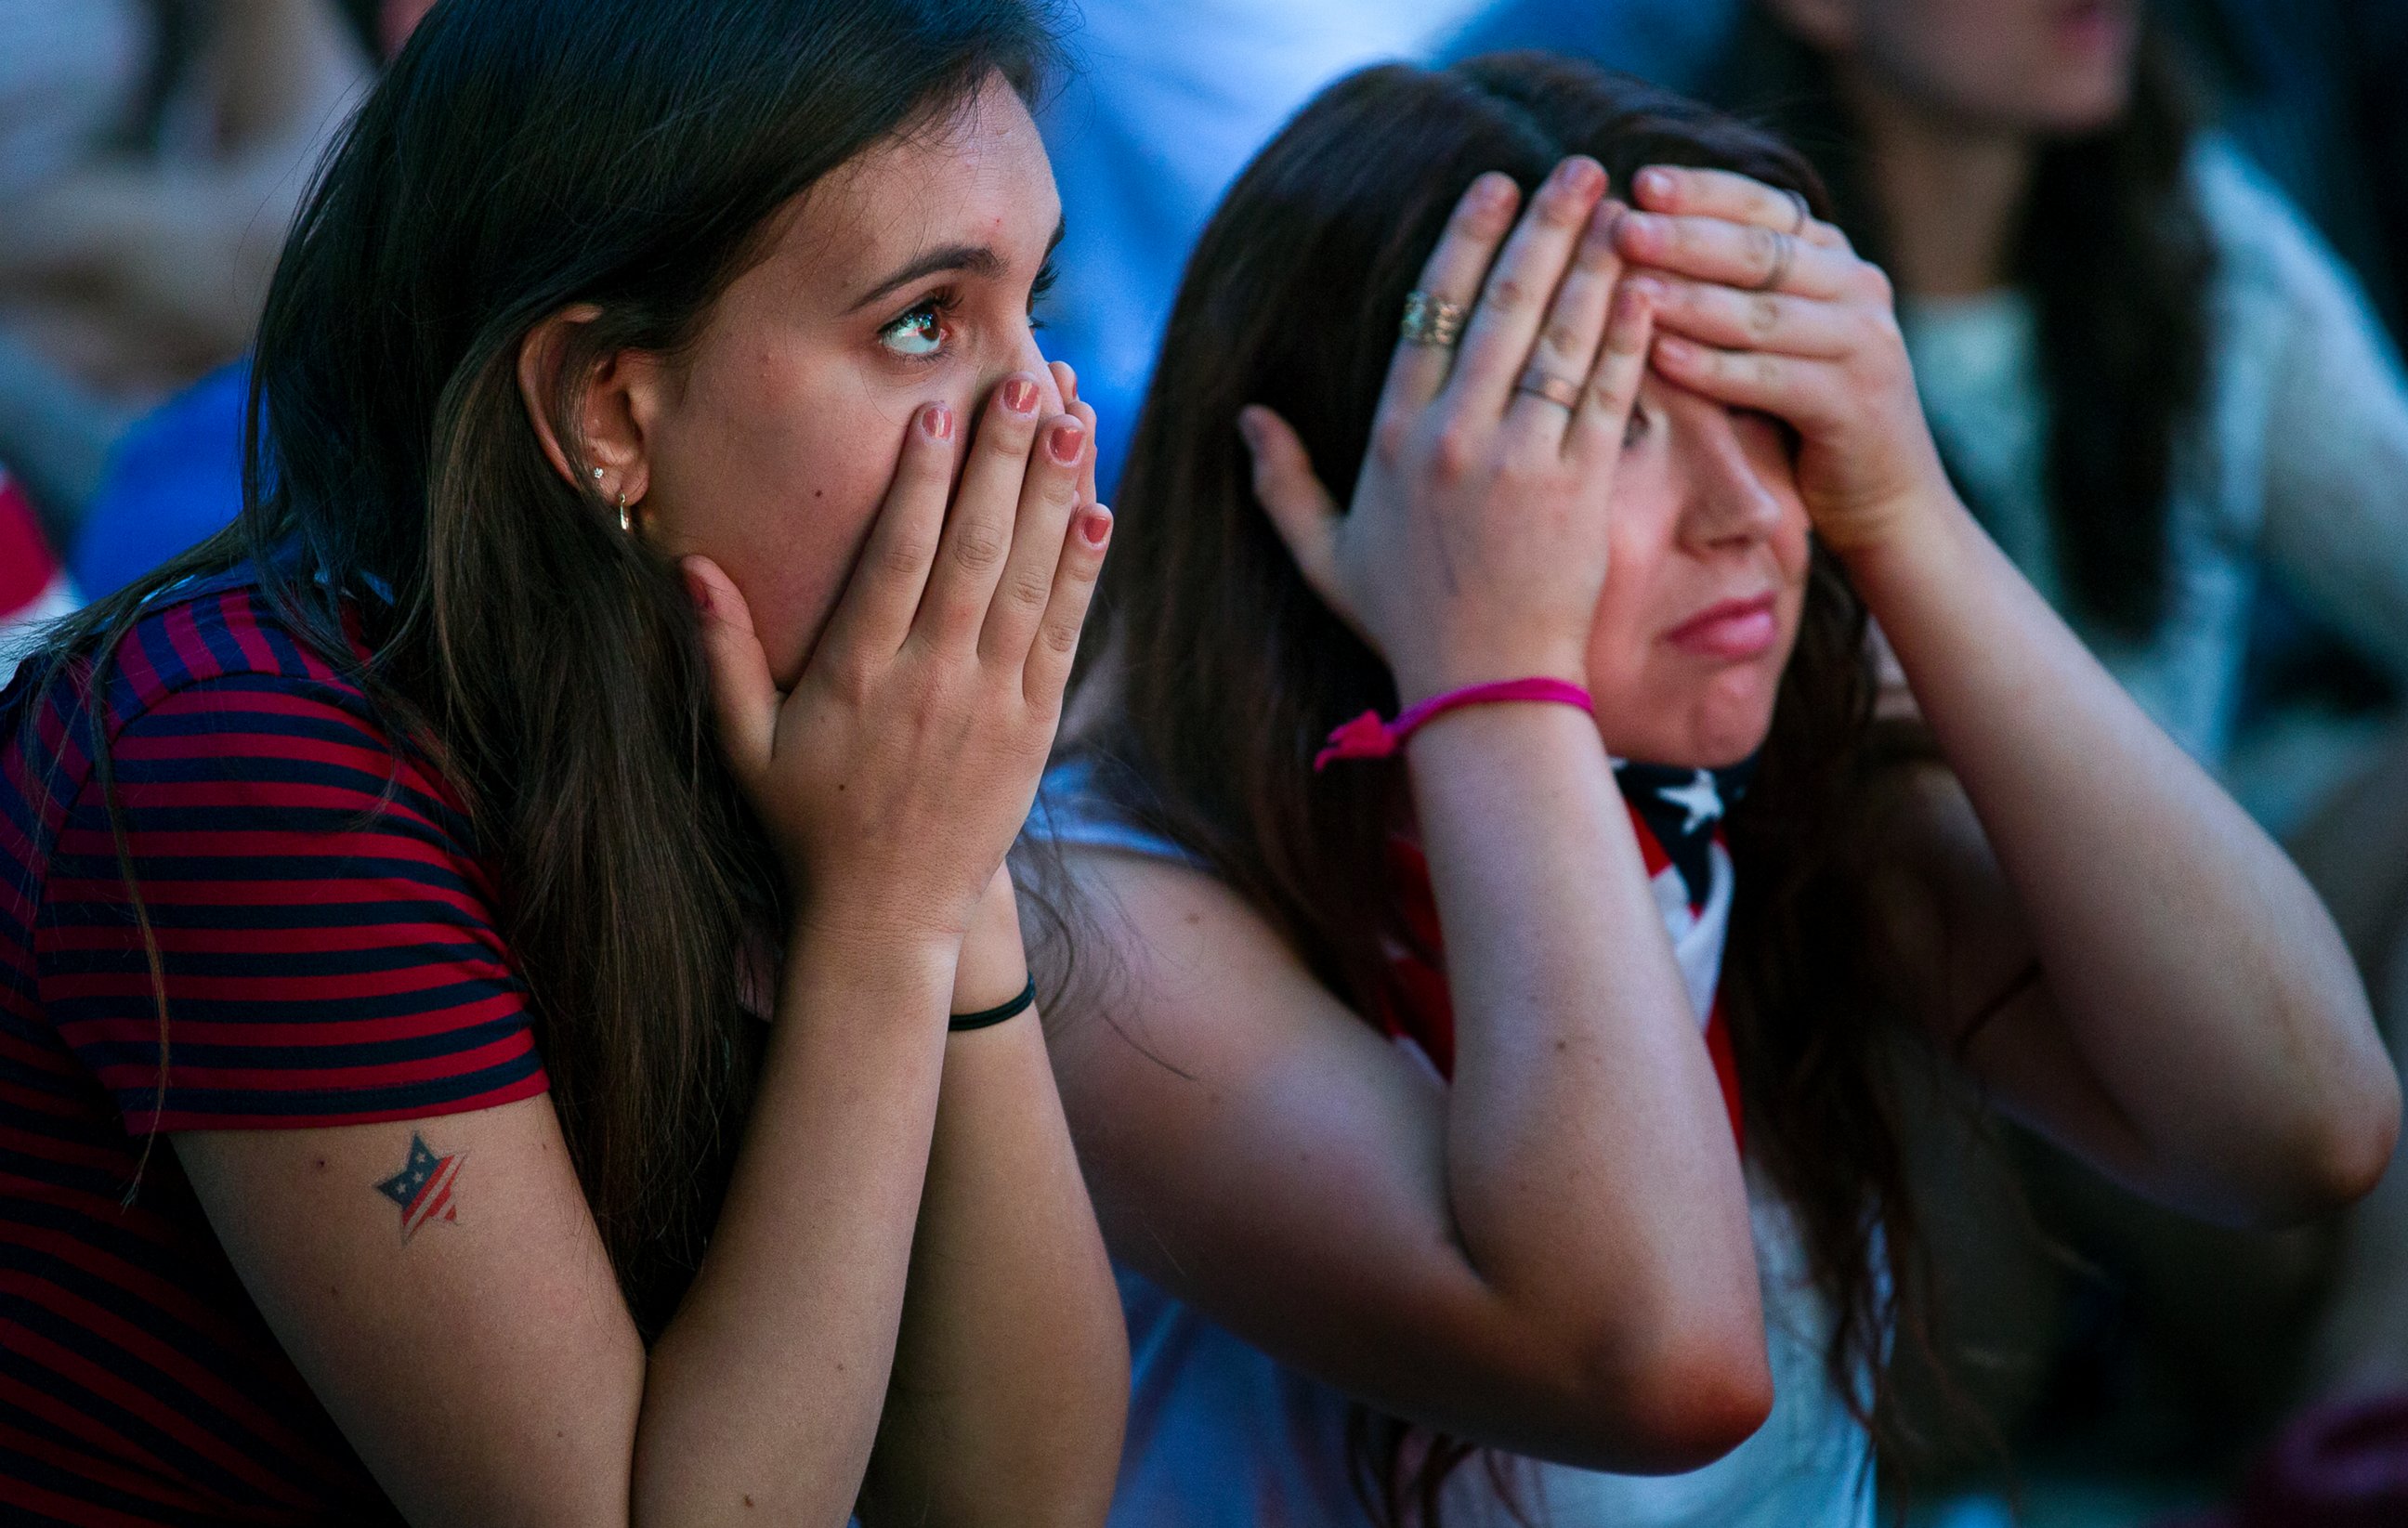 PHOTO: Allison DiFilippo, left, and Samantha Donat, both of New York, react to a last-minute goal at the end of their 2014 World Cup Group G soccer match, while watching a large screen broadcast on Governor's Island in New York, June 22, 2014. 